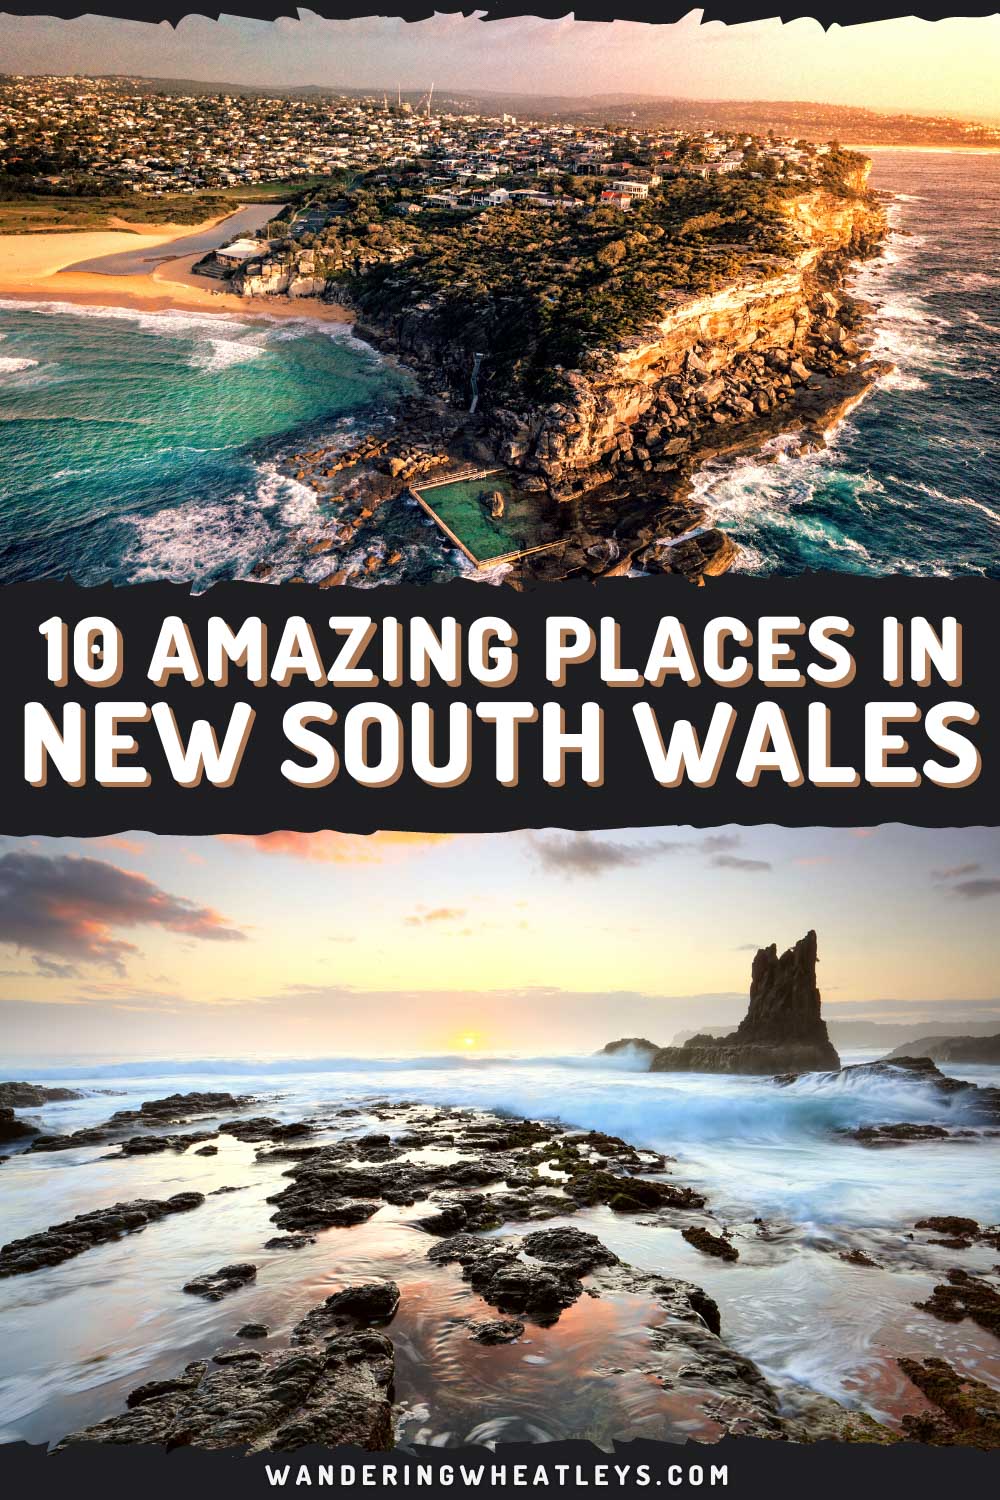 The Best Places to Visit in New South Wales